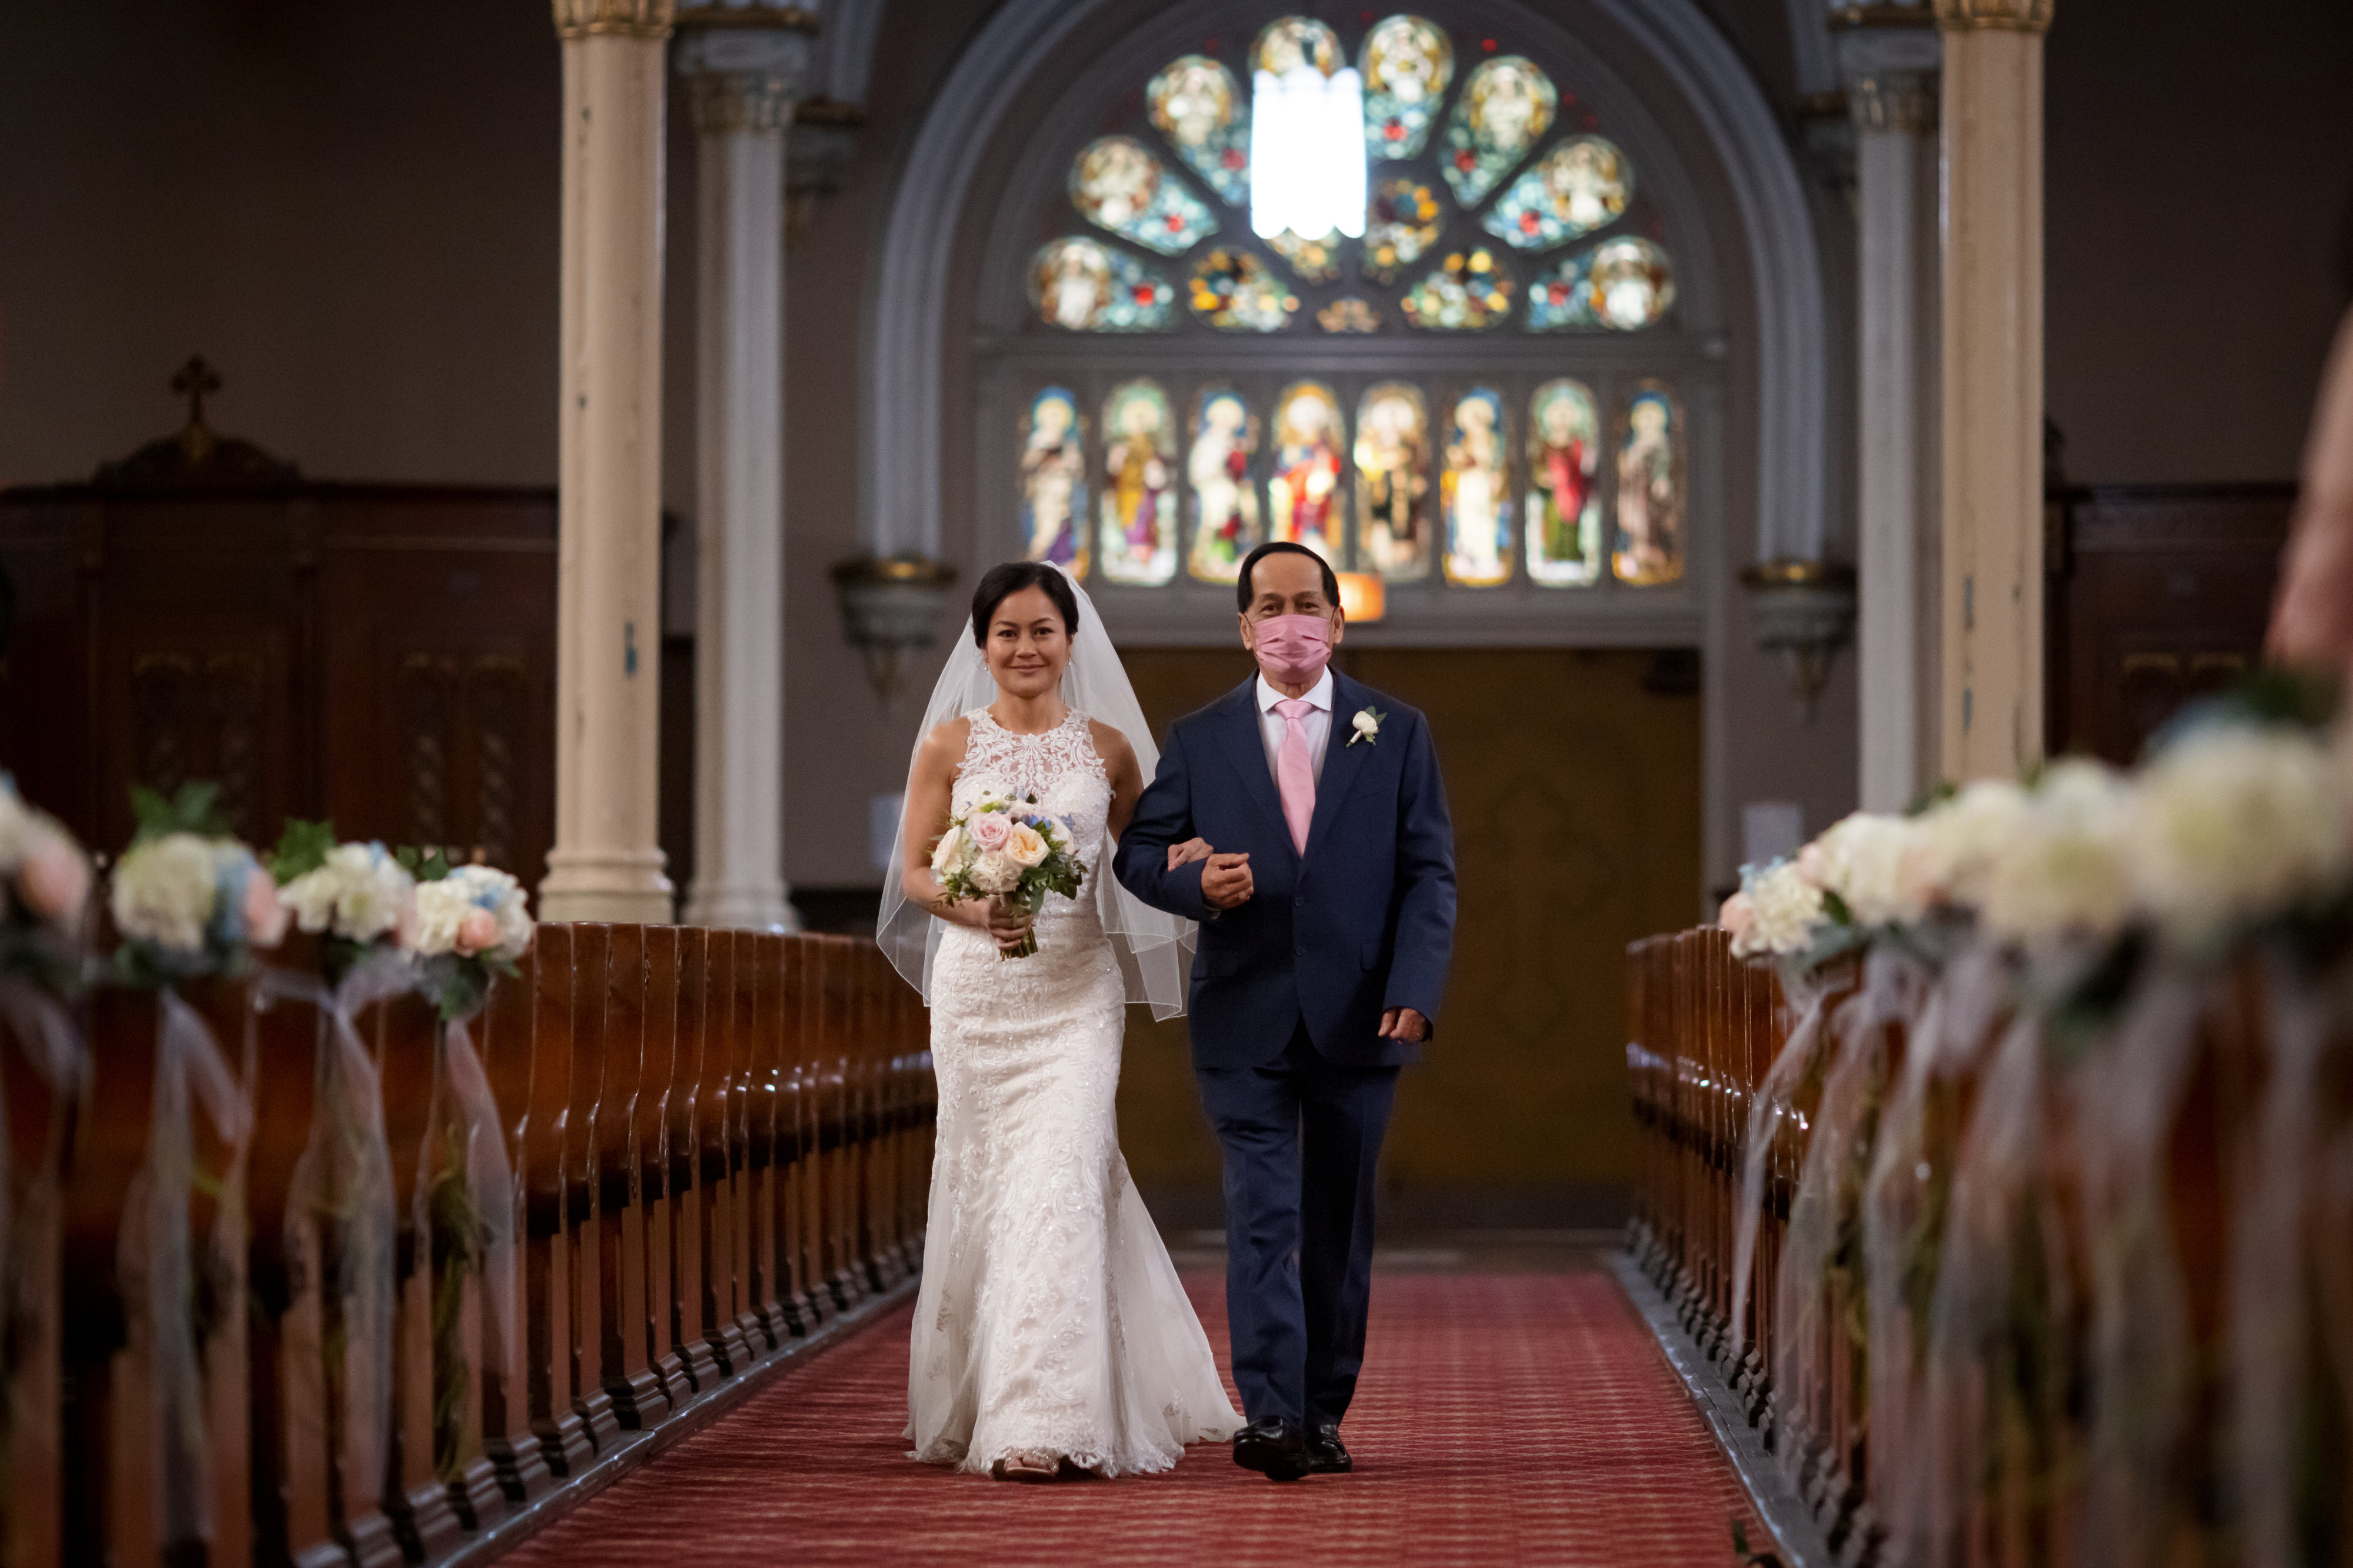 Bride and father walk down the aisle during wedding ceremony at St. Michael Old Town in Chicago